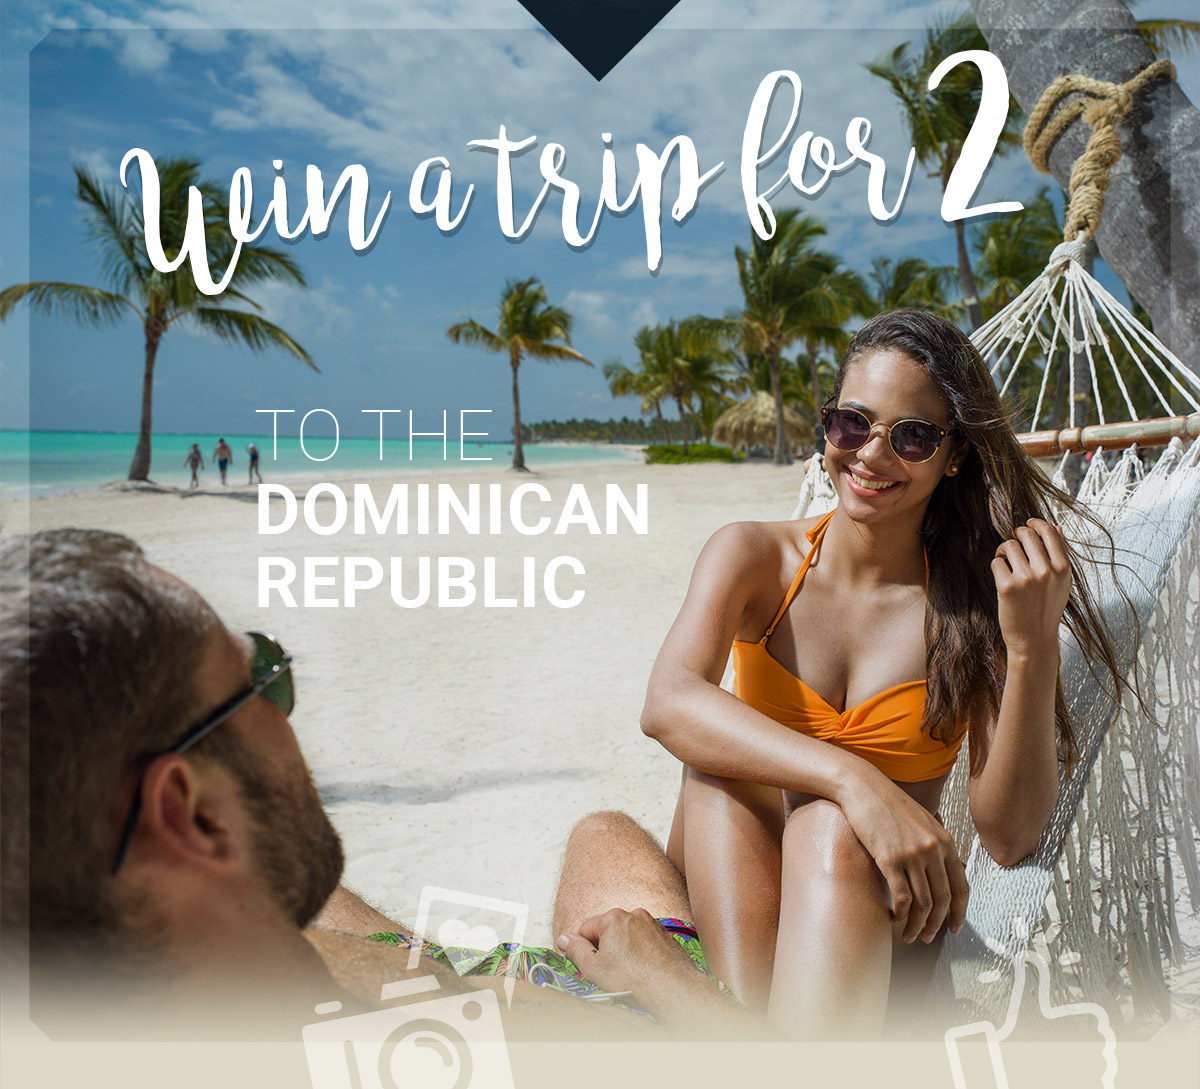 CONTEST - WIN A TRIP FOR TWO